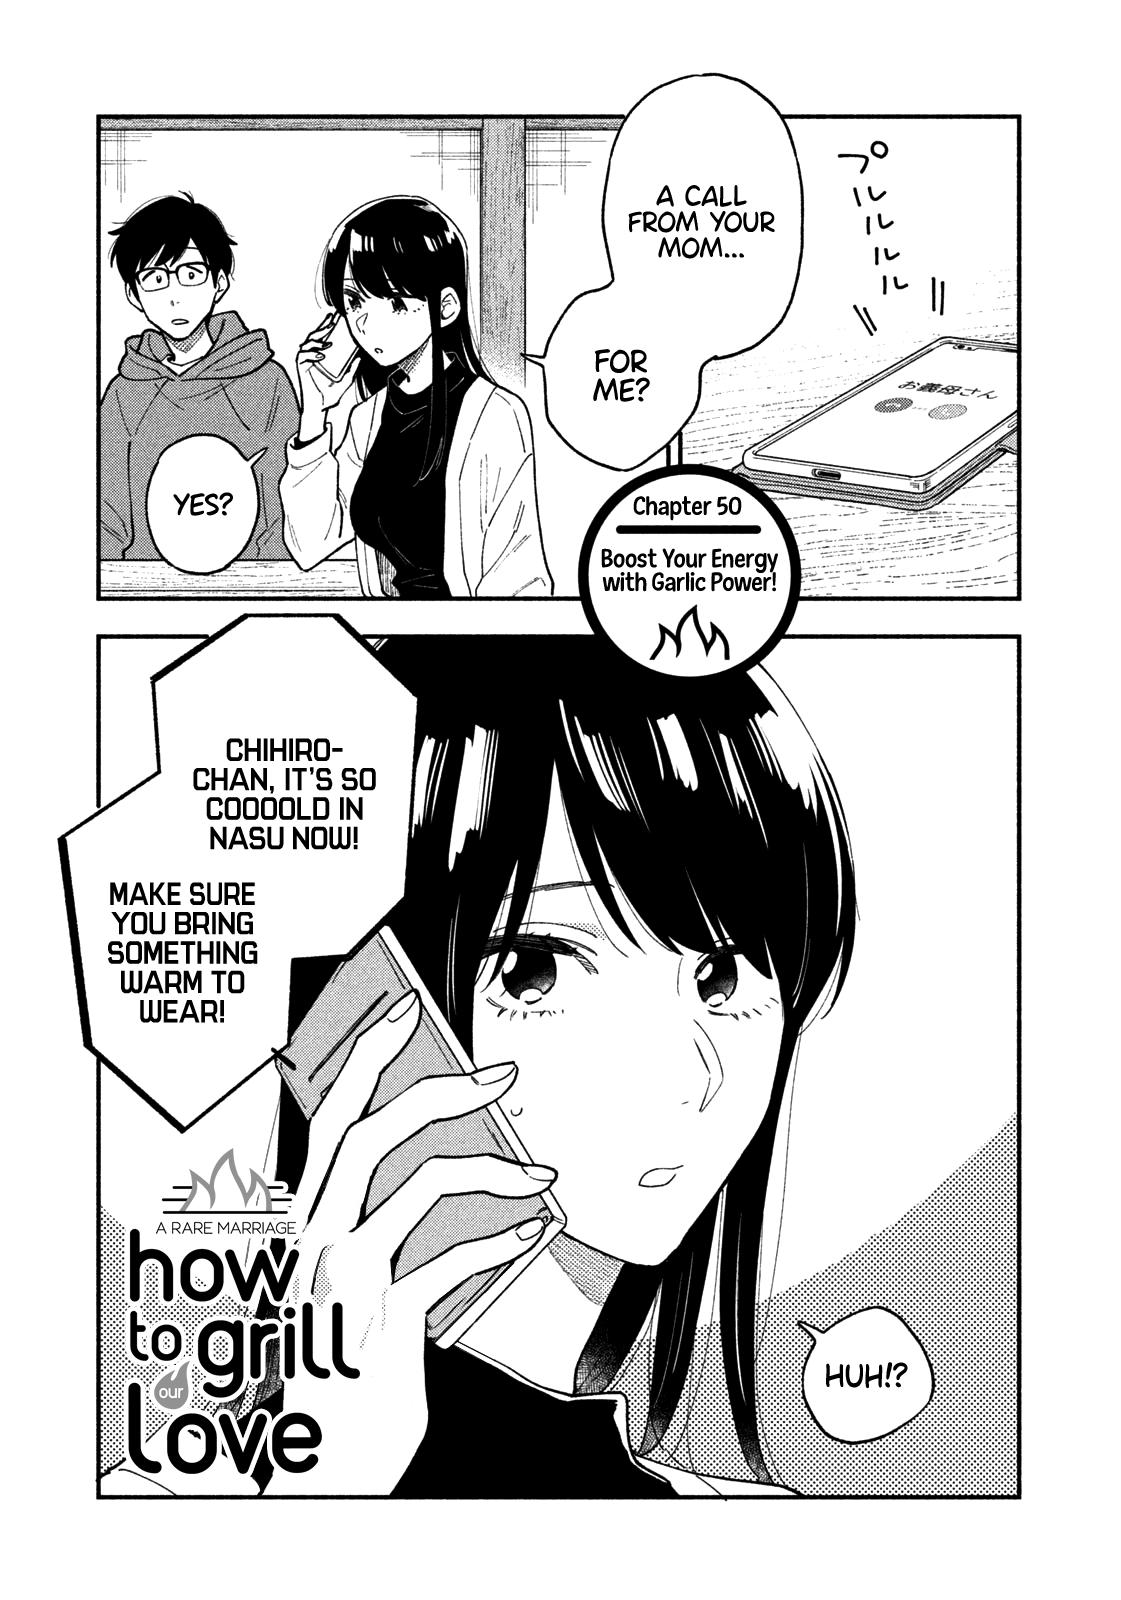 A Rare Marriage: How To Grill Our Love Chapter 50 #2